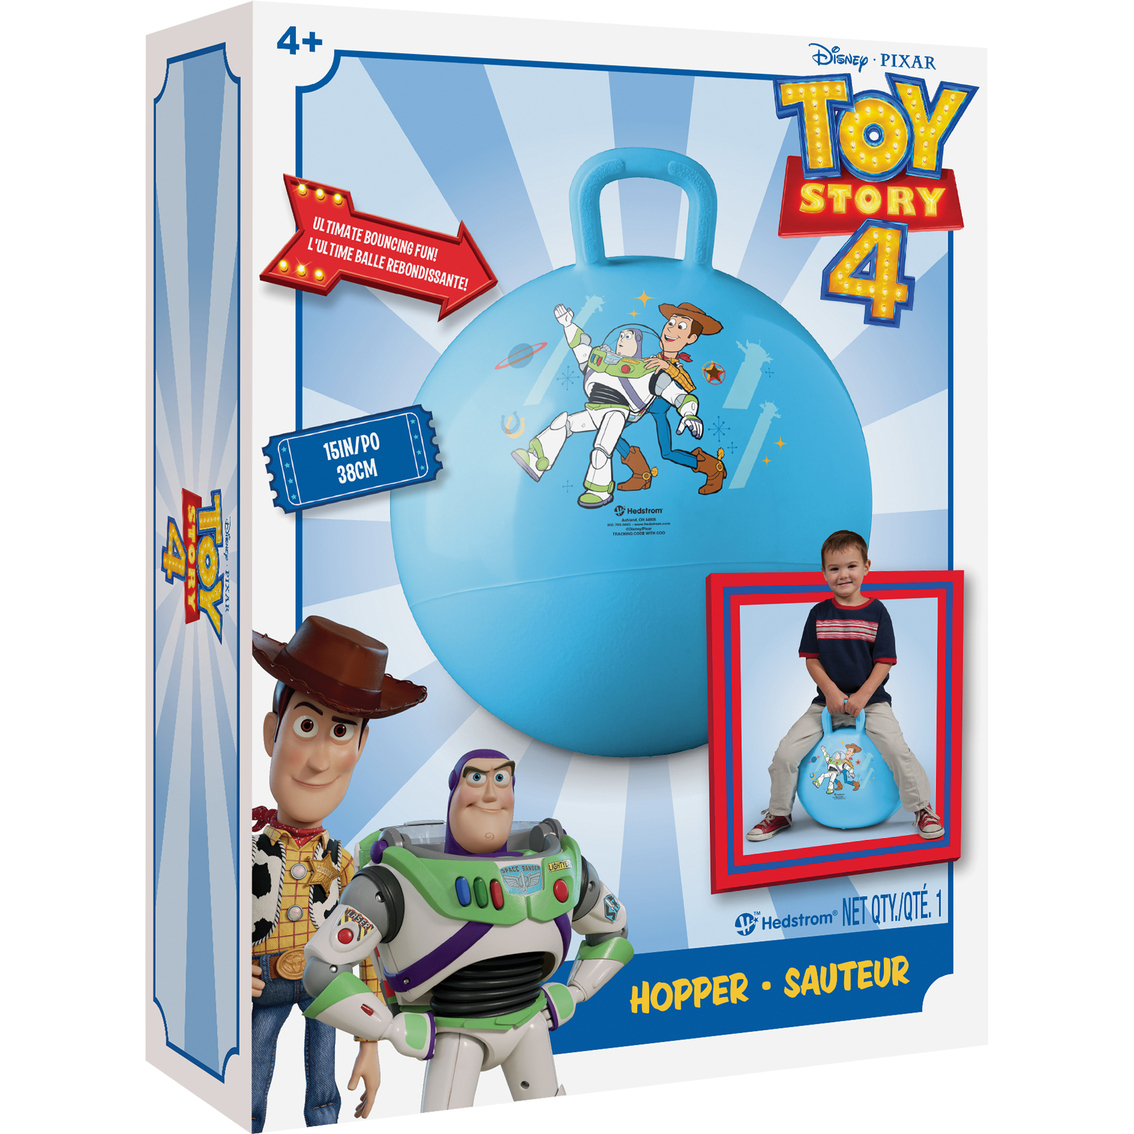 Toy Story 4 15 inch Hopper - Image 2 of 2